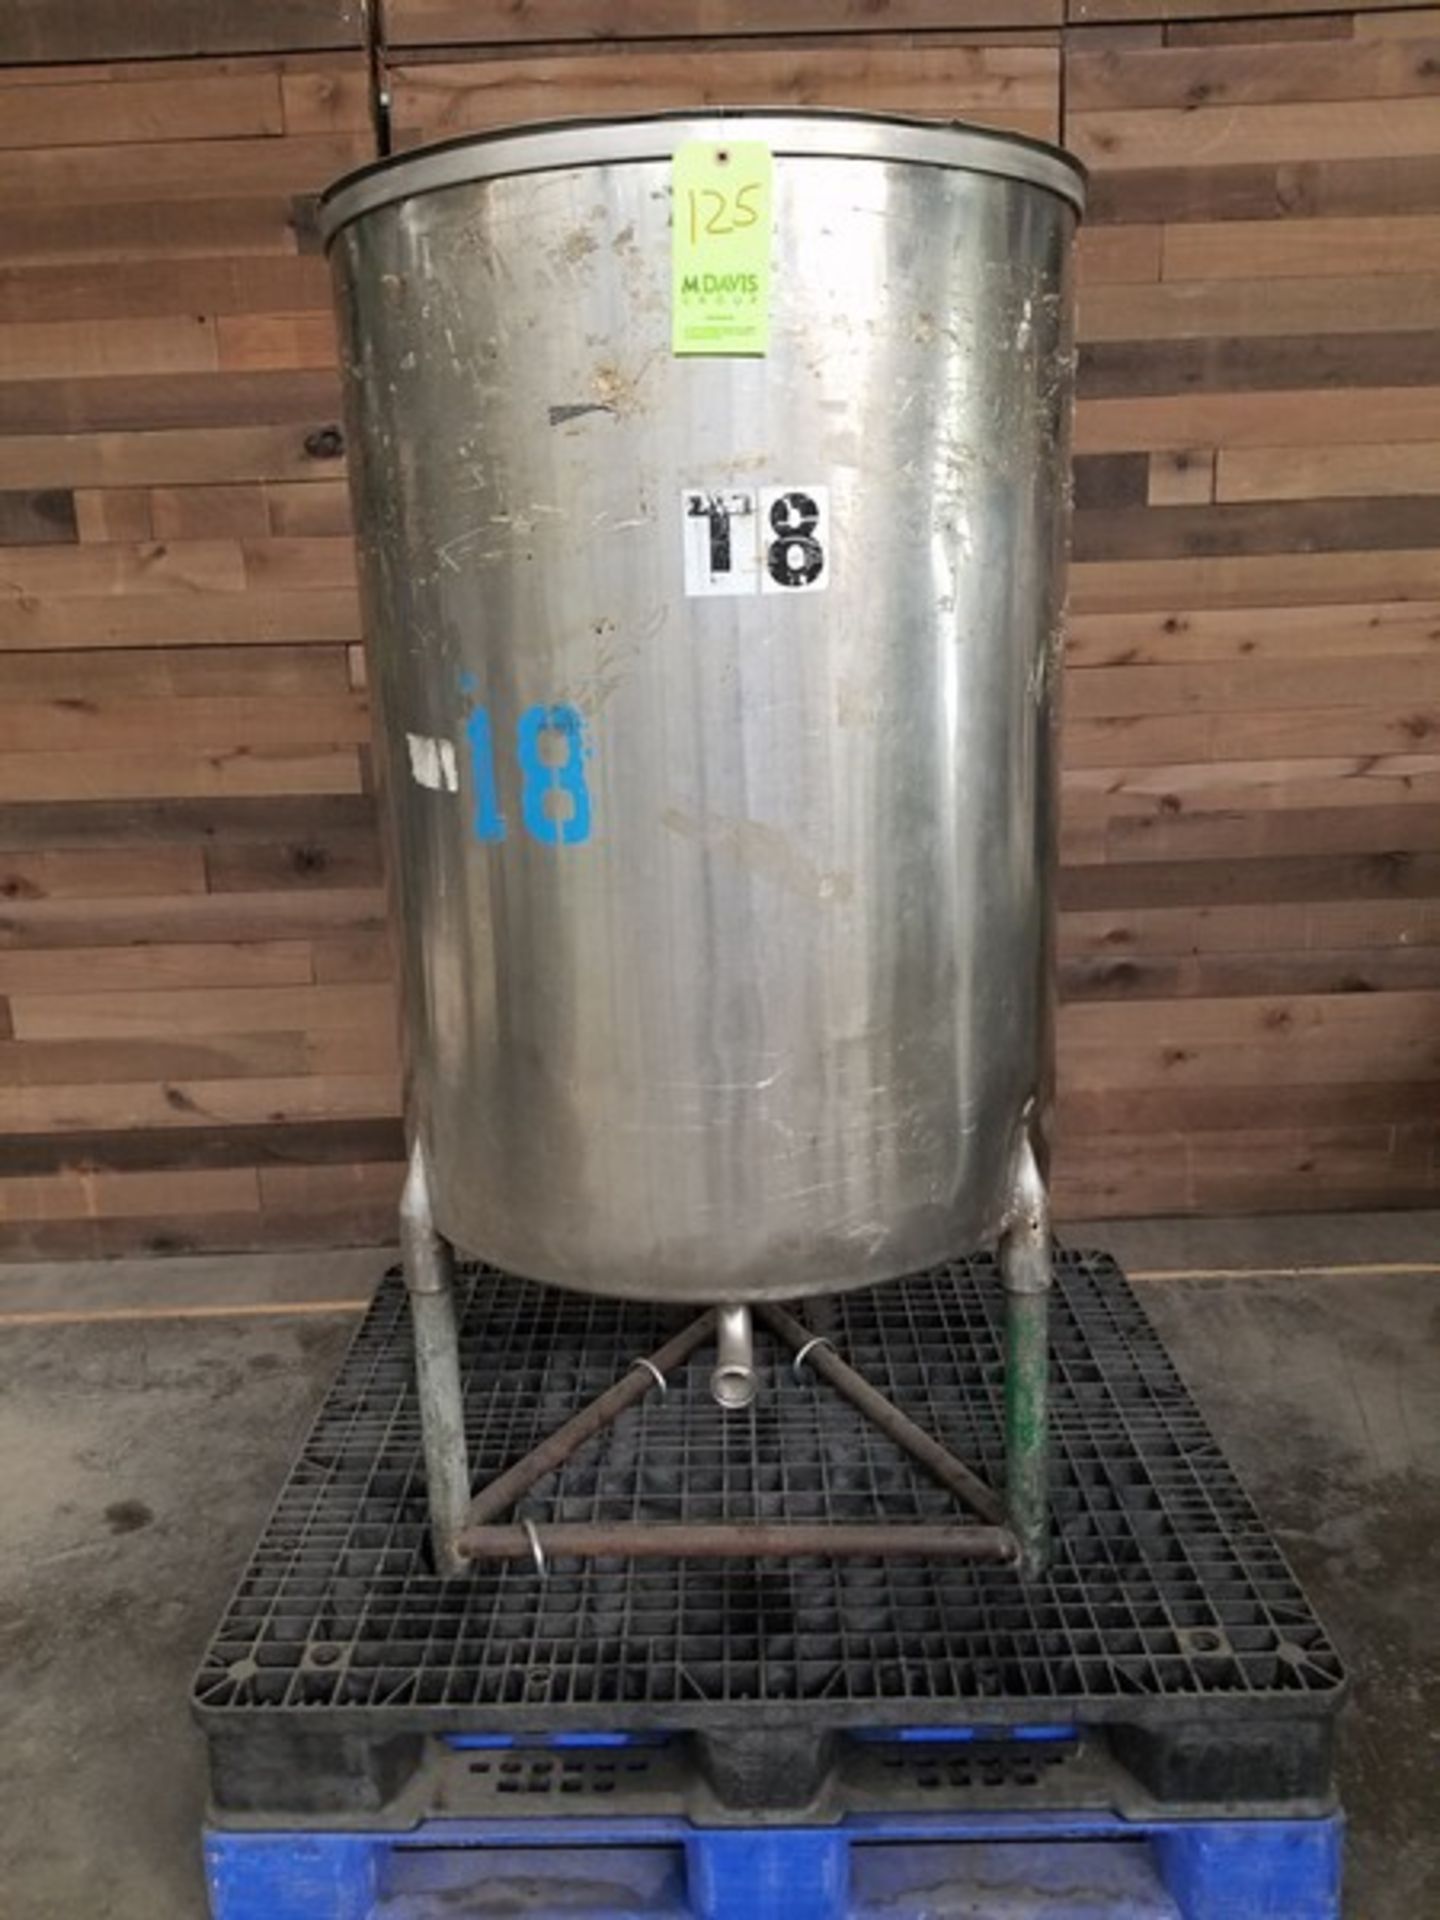 Aprox. 80 Gal. S/S Tank -- Aprox. 30" round x 42" height (64" Overall height) (Handling, Loading